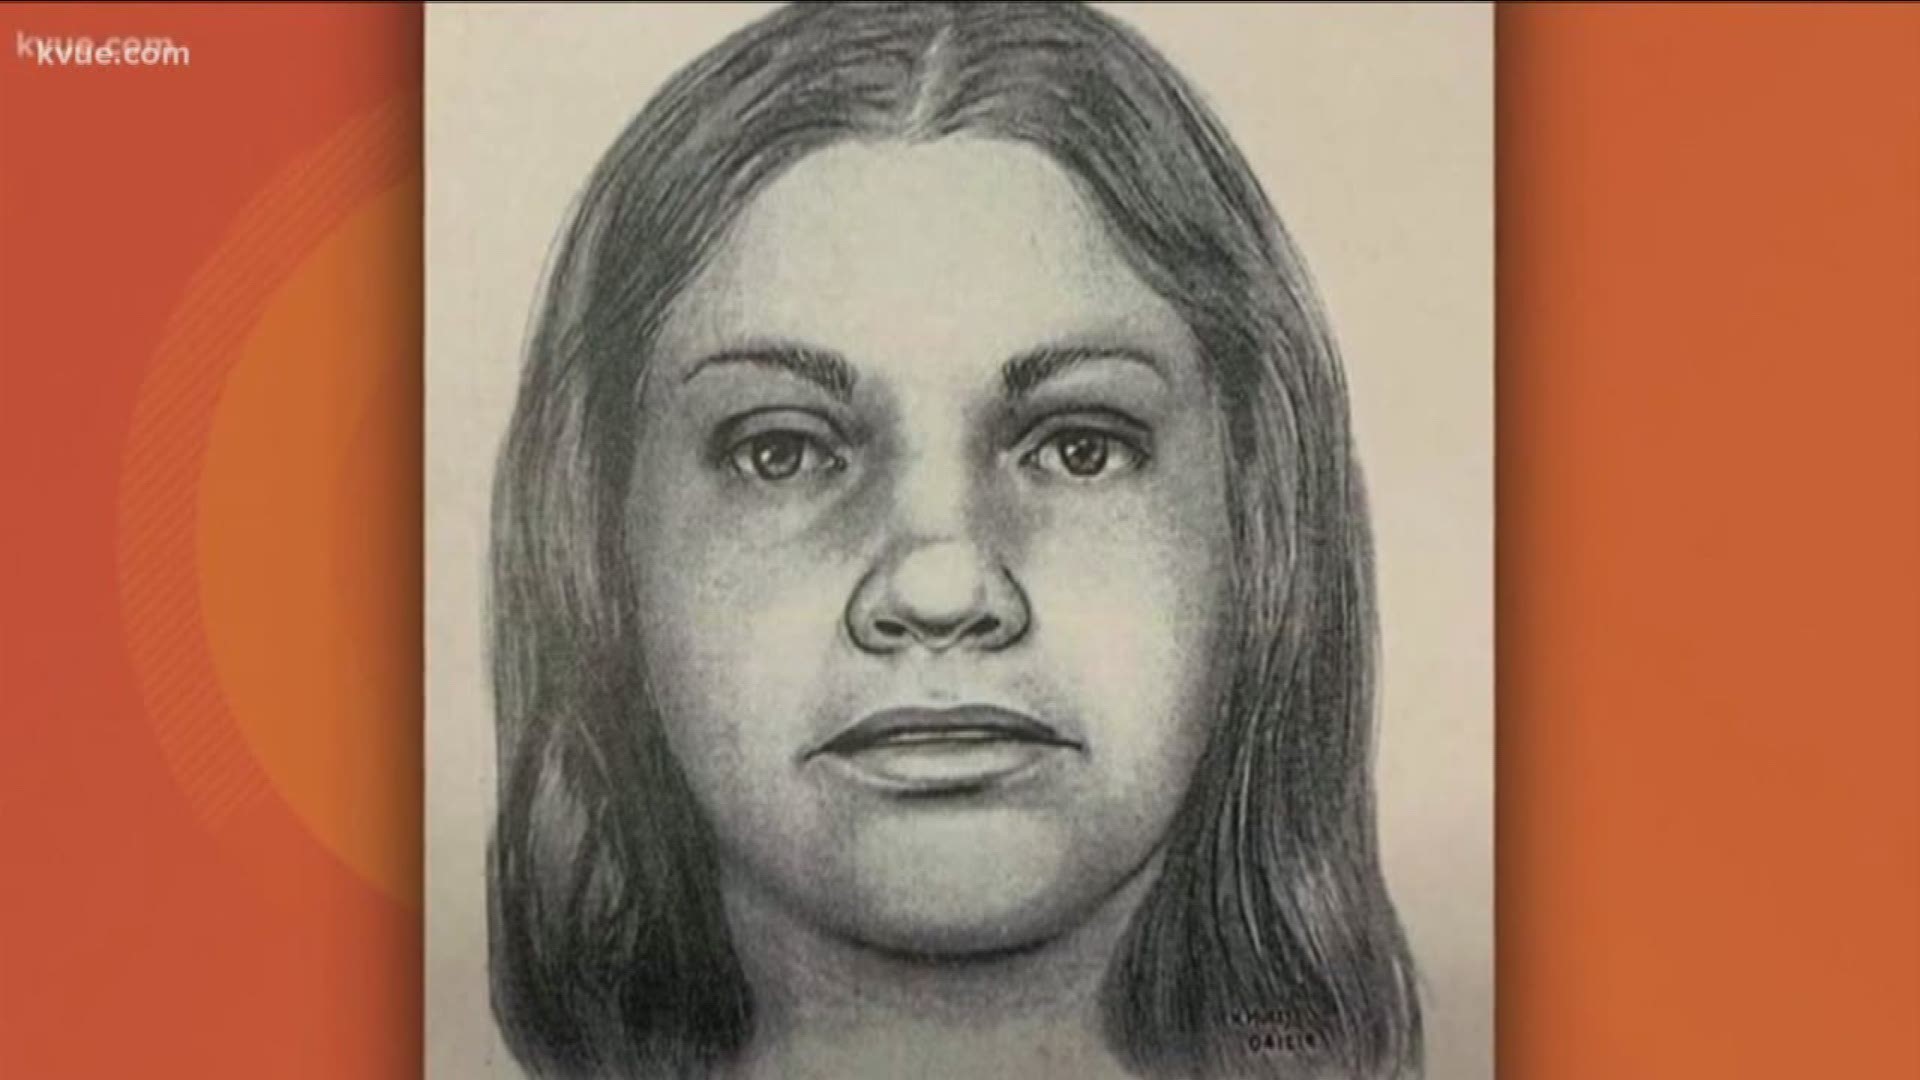 The unidentified woman had been strangled in 1979.